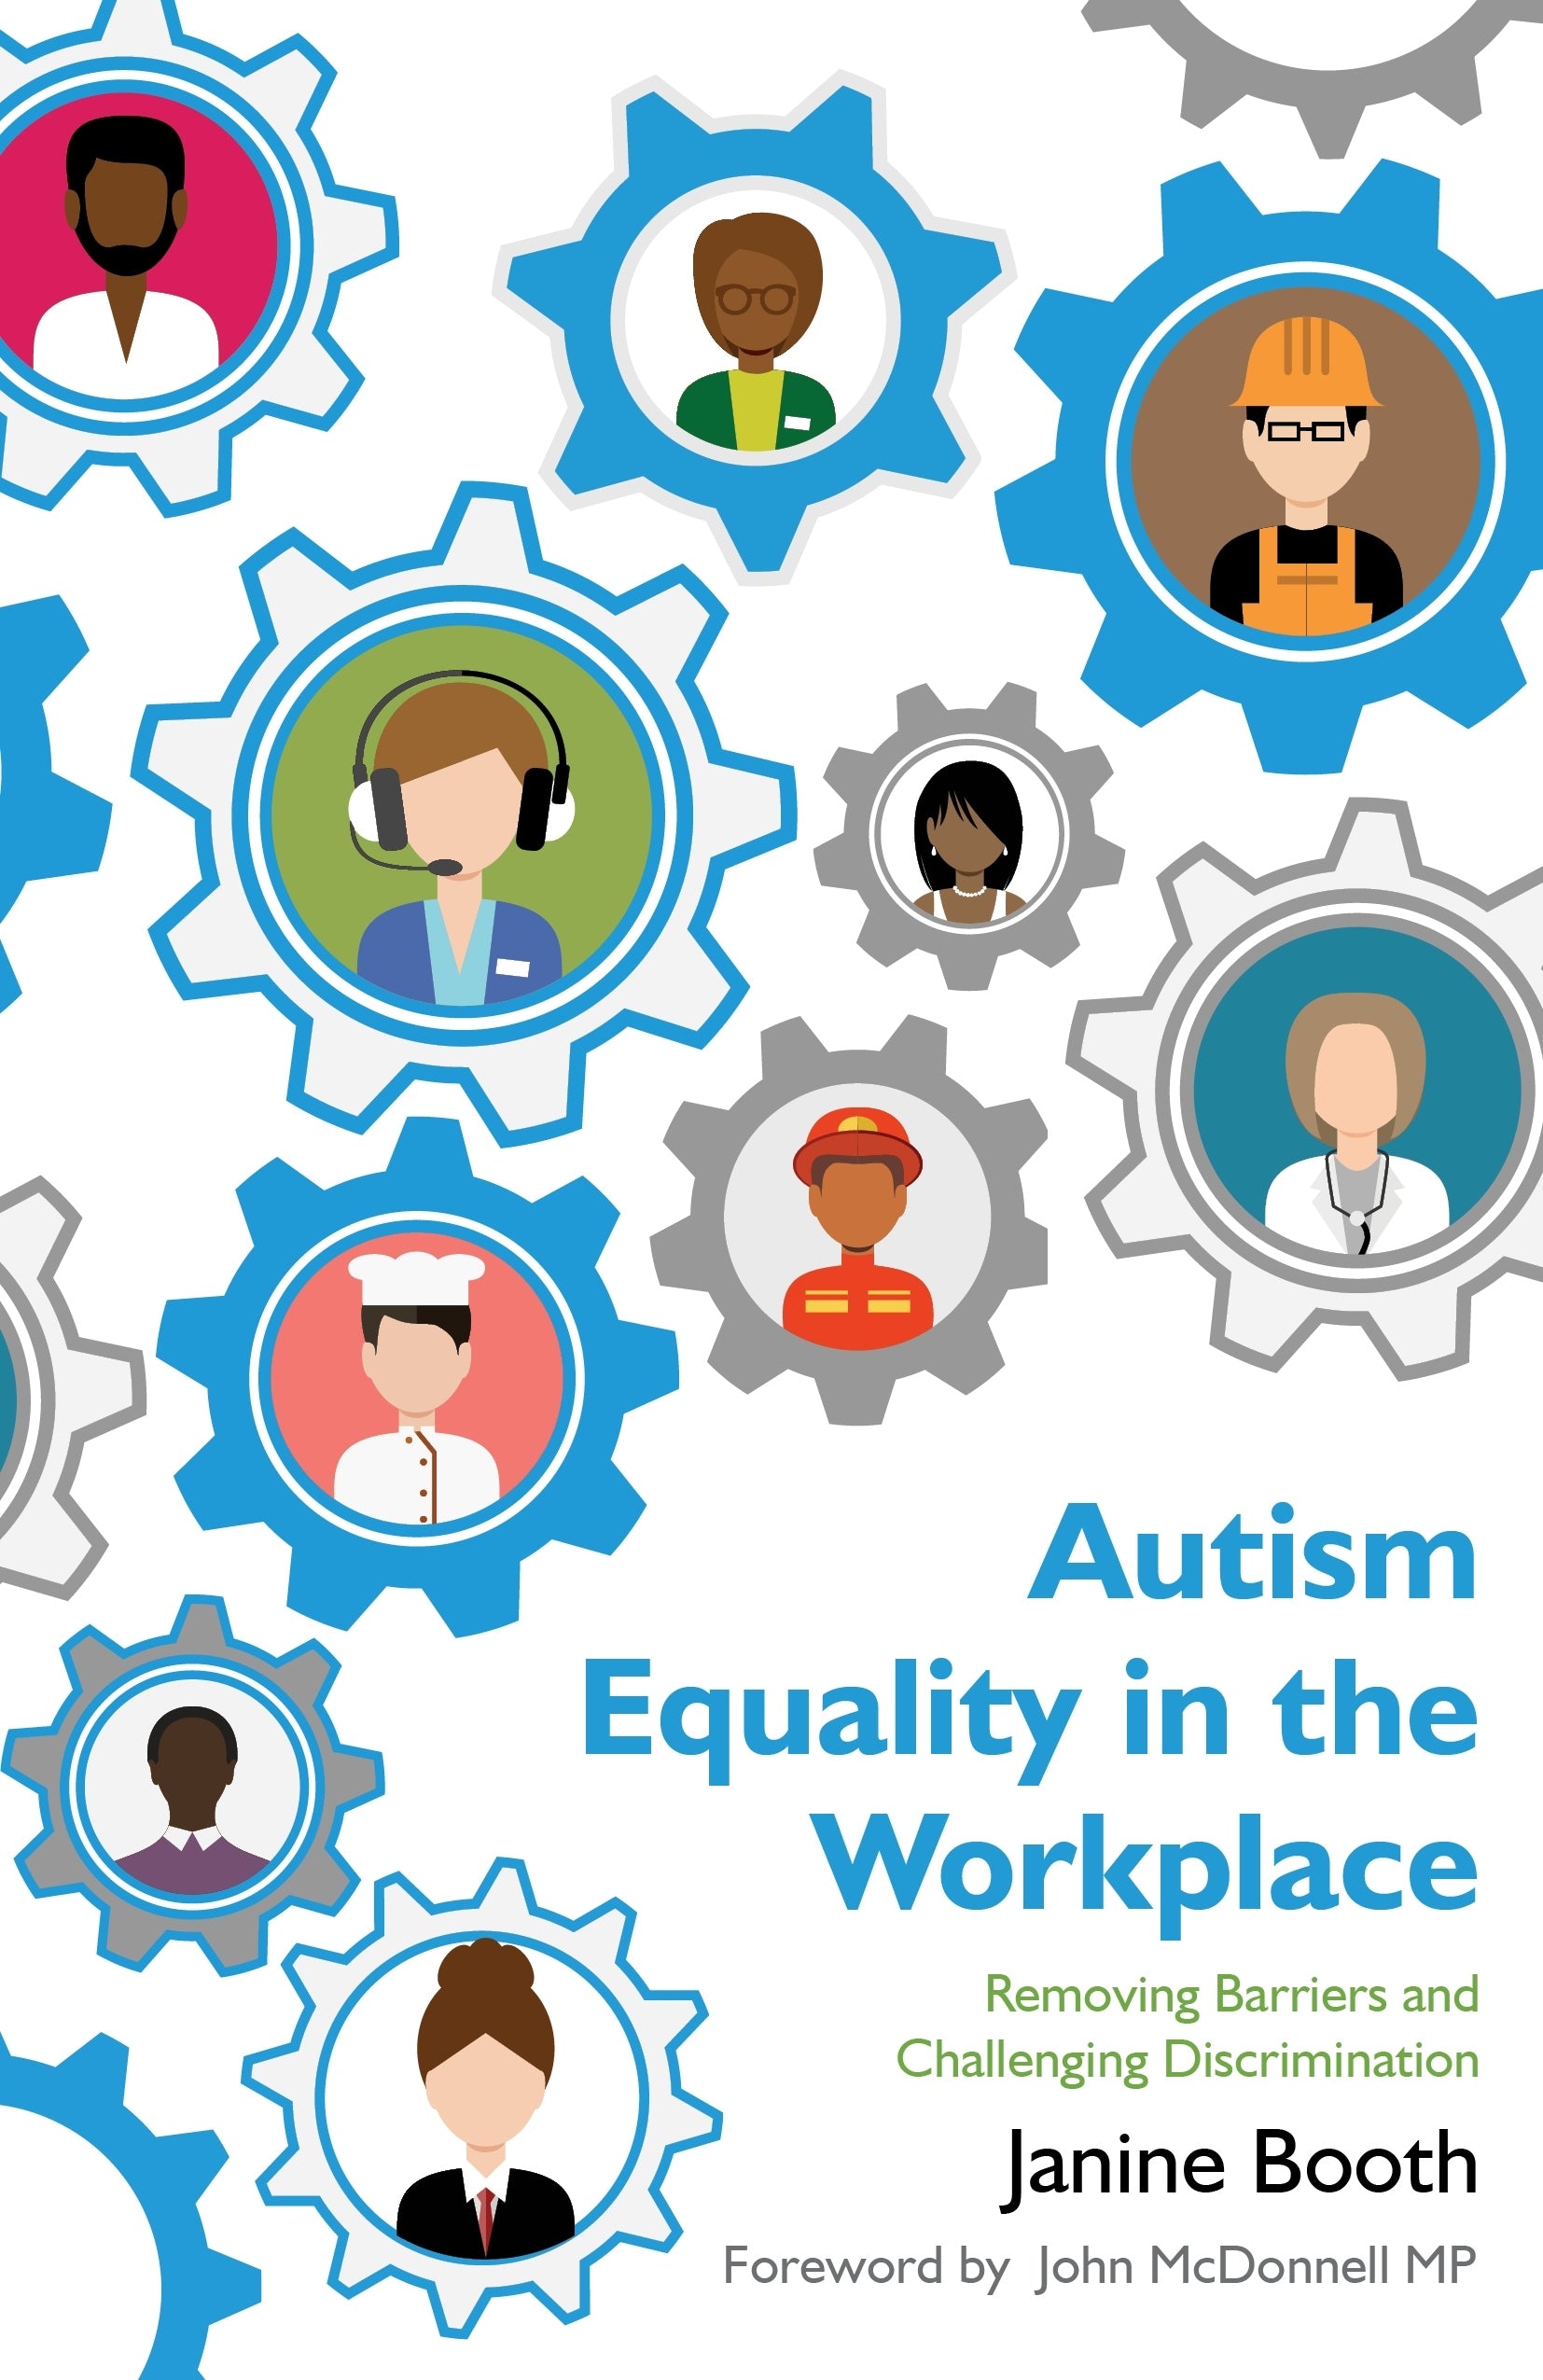 Autism Equality in the Workplace by Janine Booth, John McDonnell